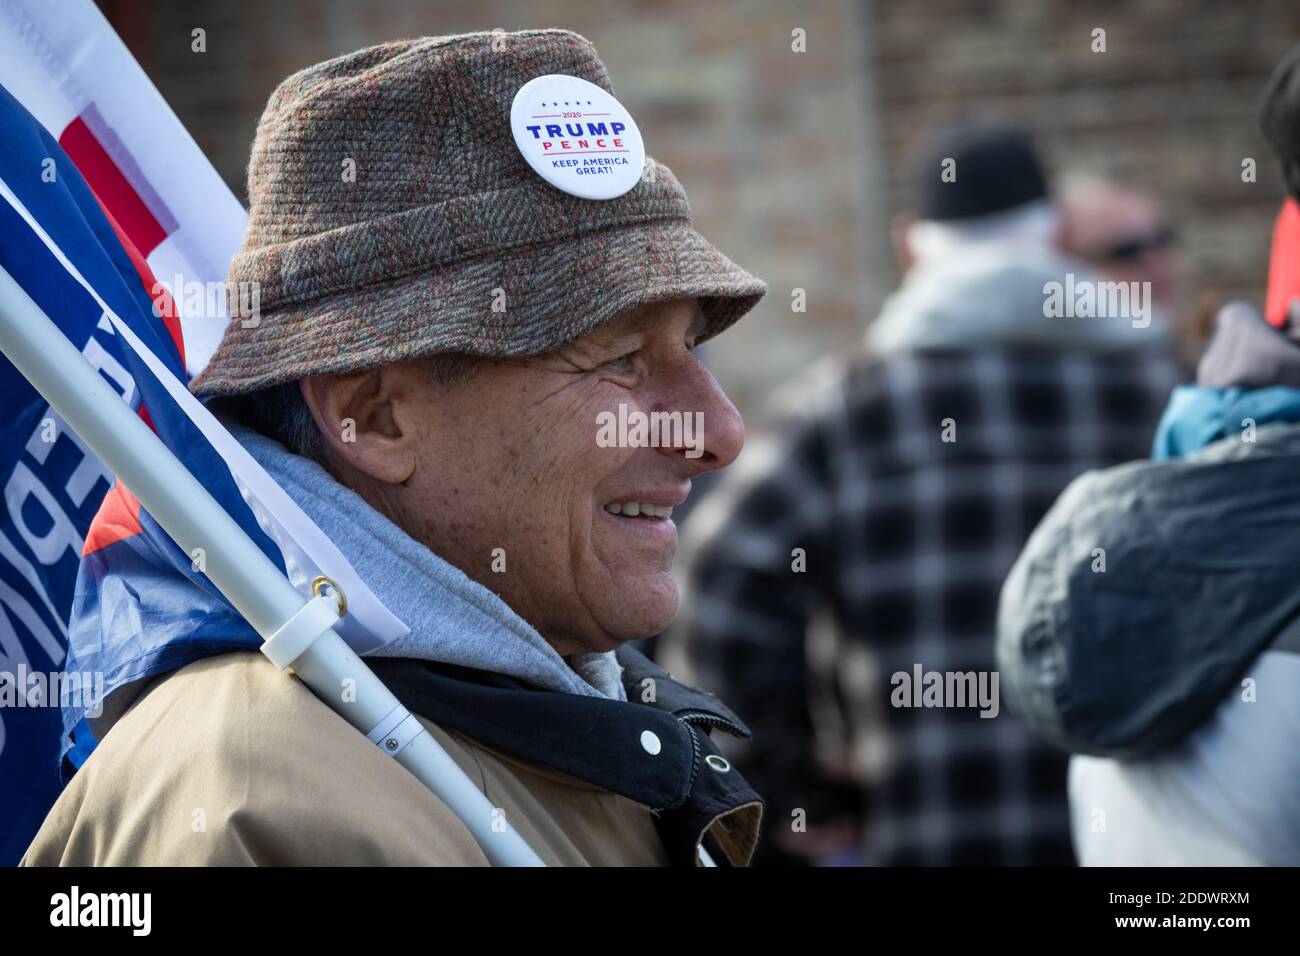 Pro Trump rally at a country music bar in Chicago's far south side Mount Greenwood neighborhood on the Sunday before Election Day. The outdoor rally was held in a parking lot next to the bar and along 111th street, a busy thouroghfare in the neighborhood. Stock Photo